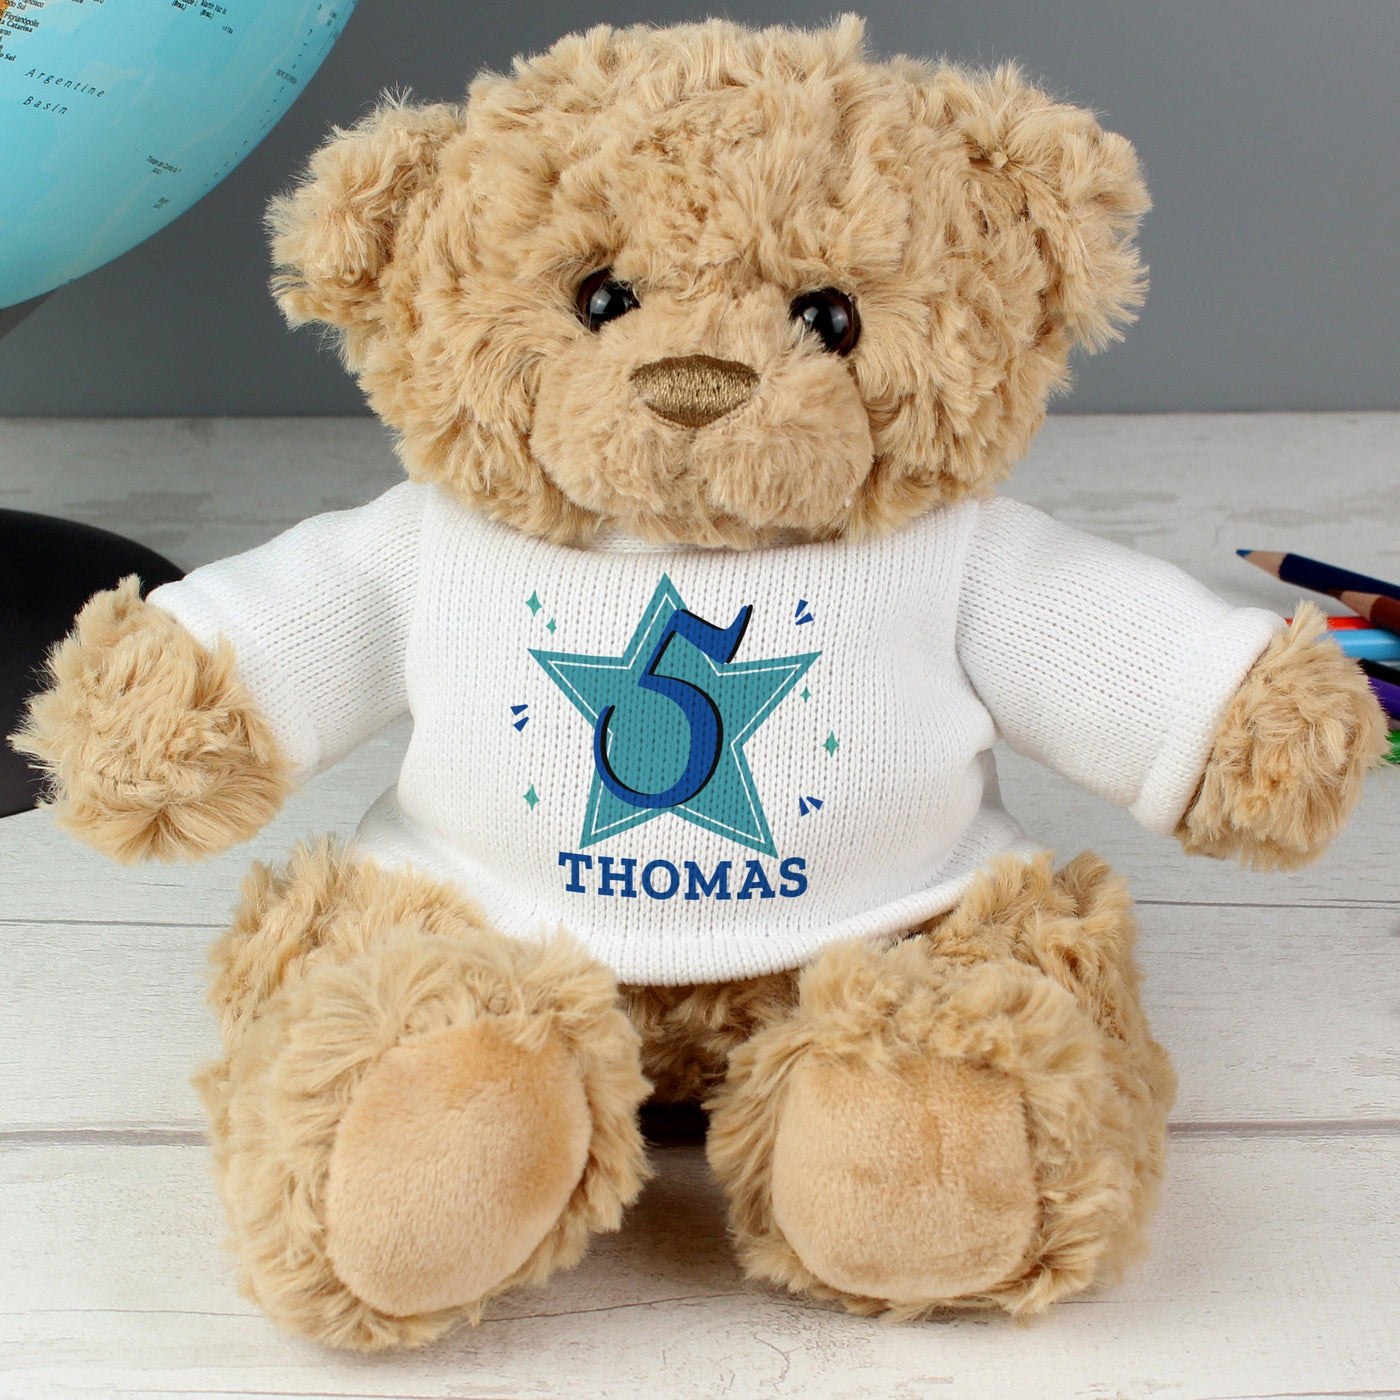 Personalised Blue Big Age Teddy Bear - Shop Personalised Gifts